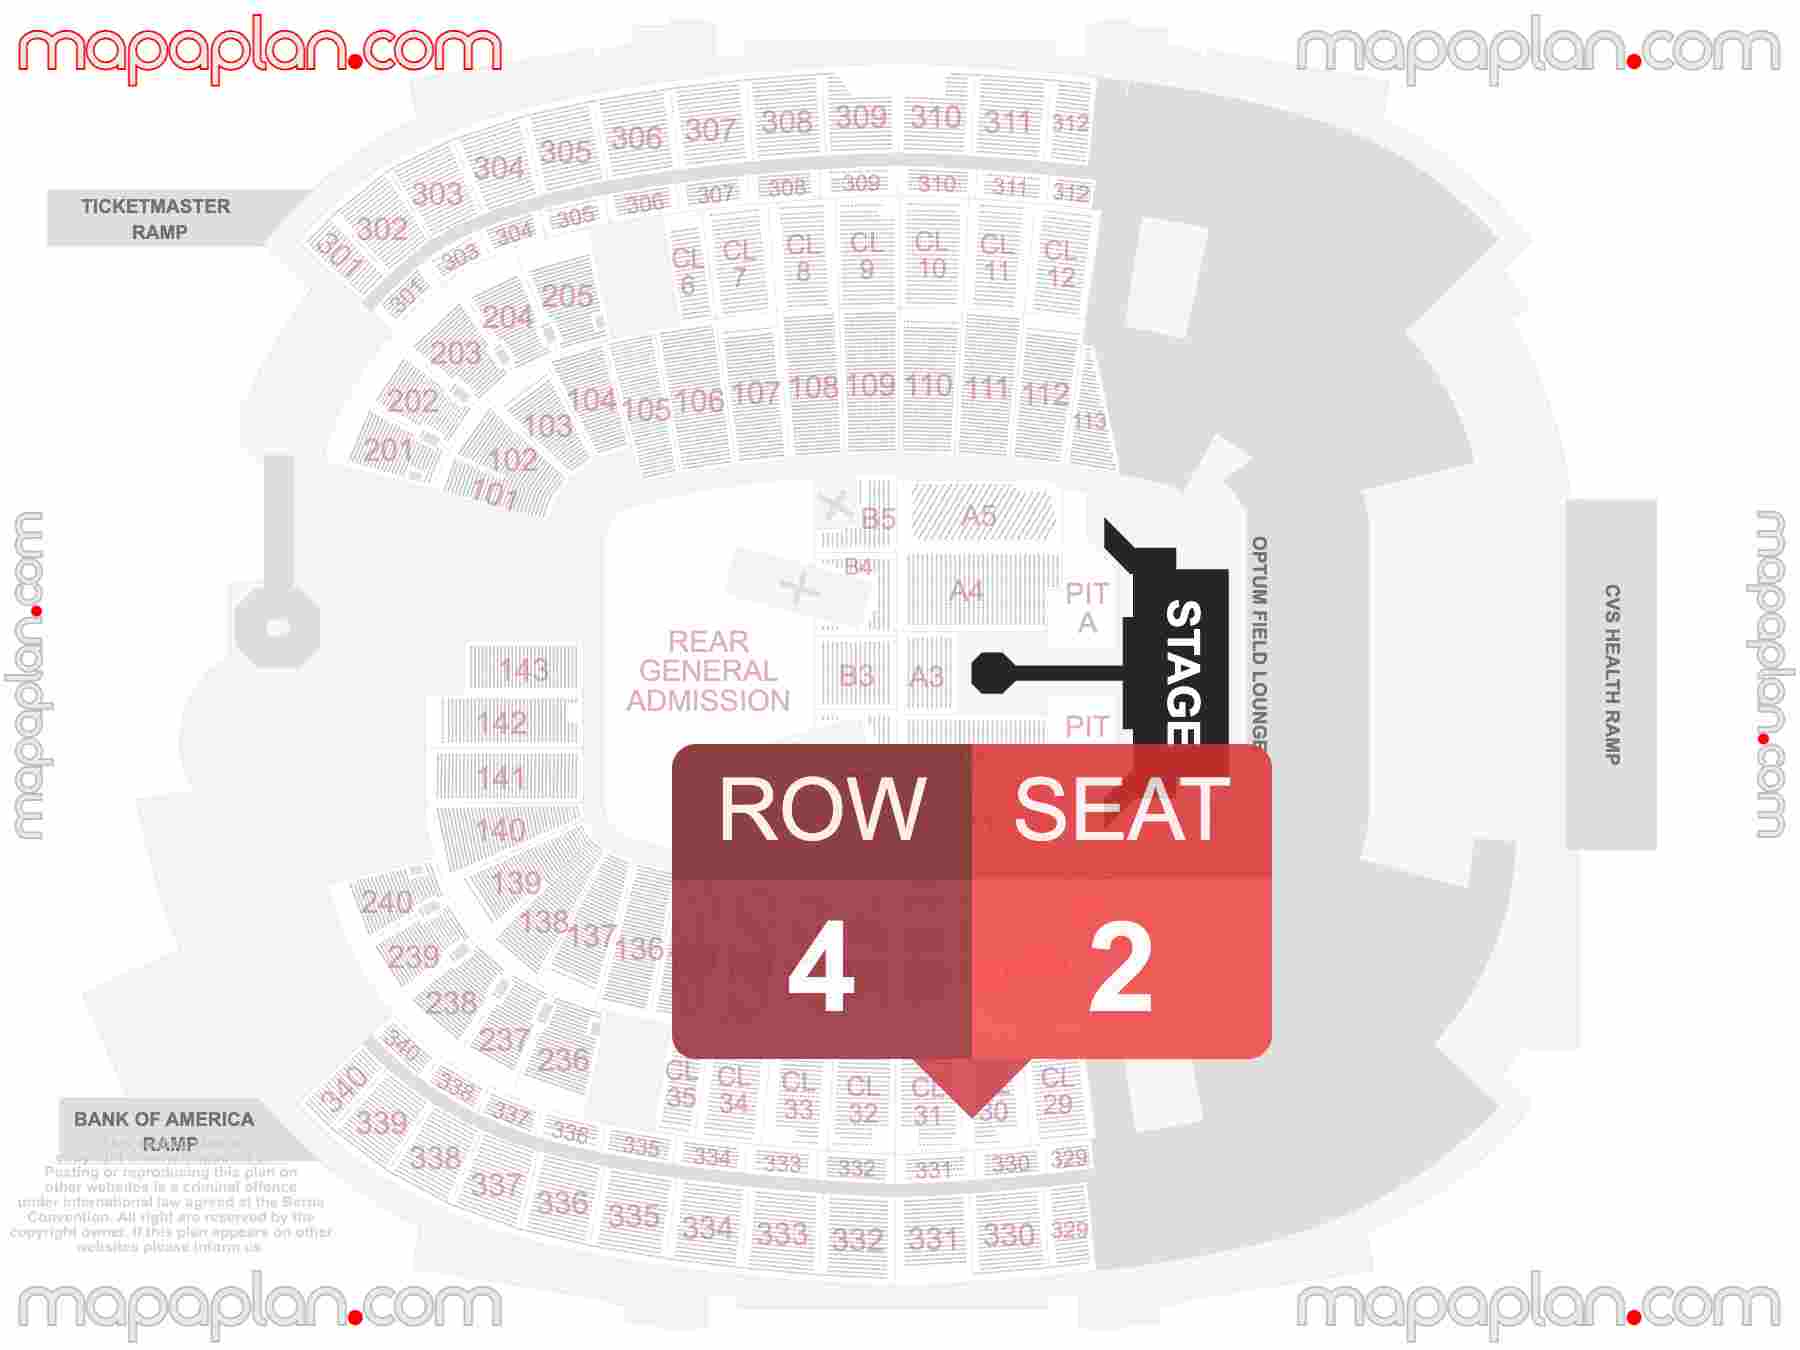 Foxborough Gillette Stadium seating chart Concert with extended catwalk runway B-stage and PIT floor general admission standing find best seats row numbering system plan showing how many seats per row - Individual 'find my seat' virtual locator